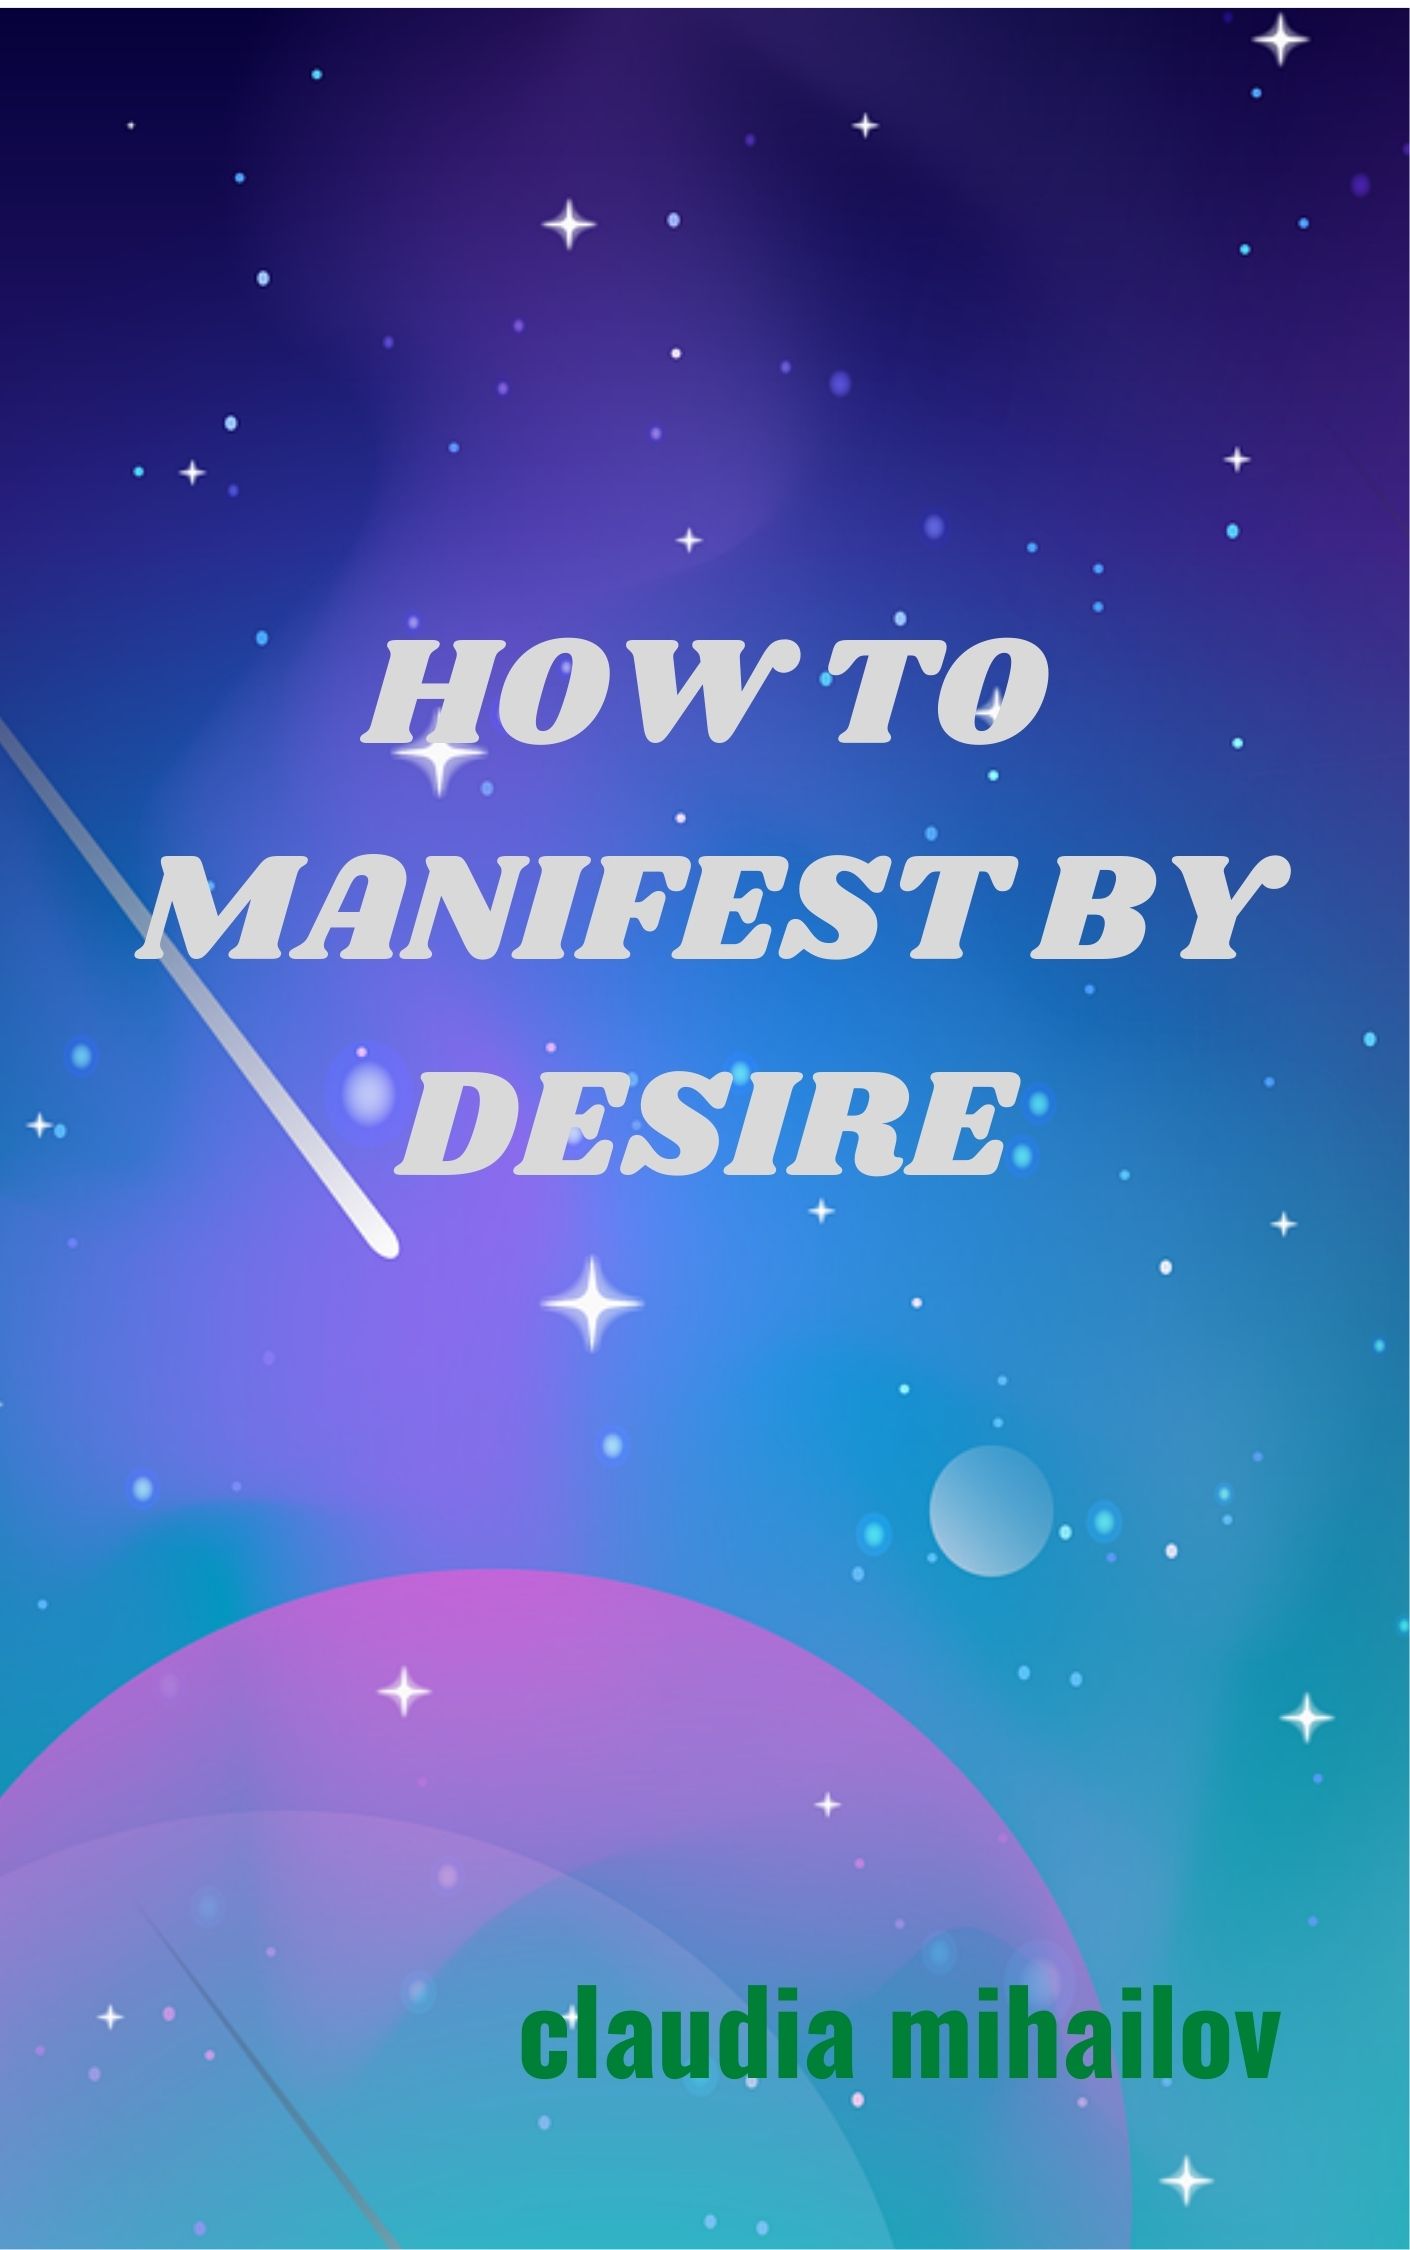 How to manifest by desire Claudia Mihailov Book Cover